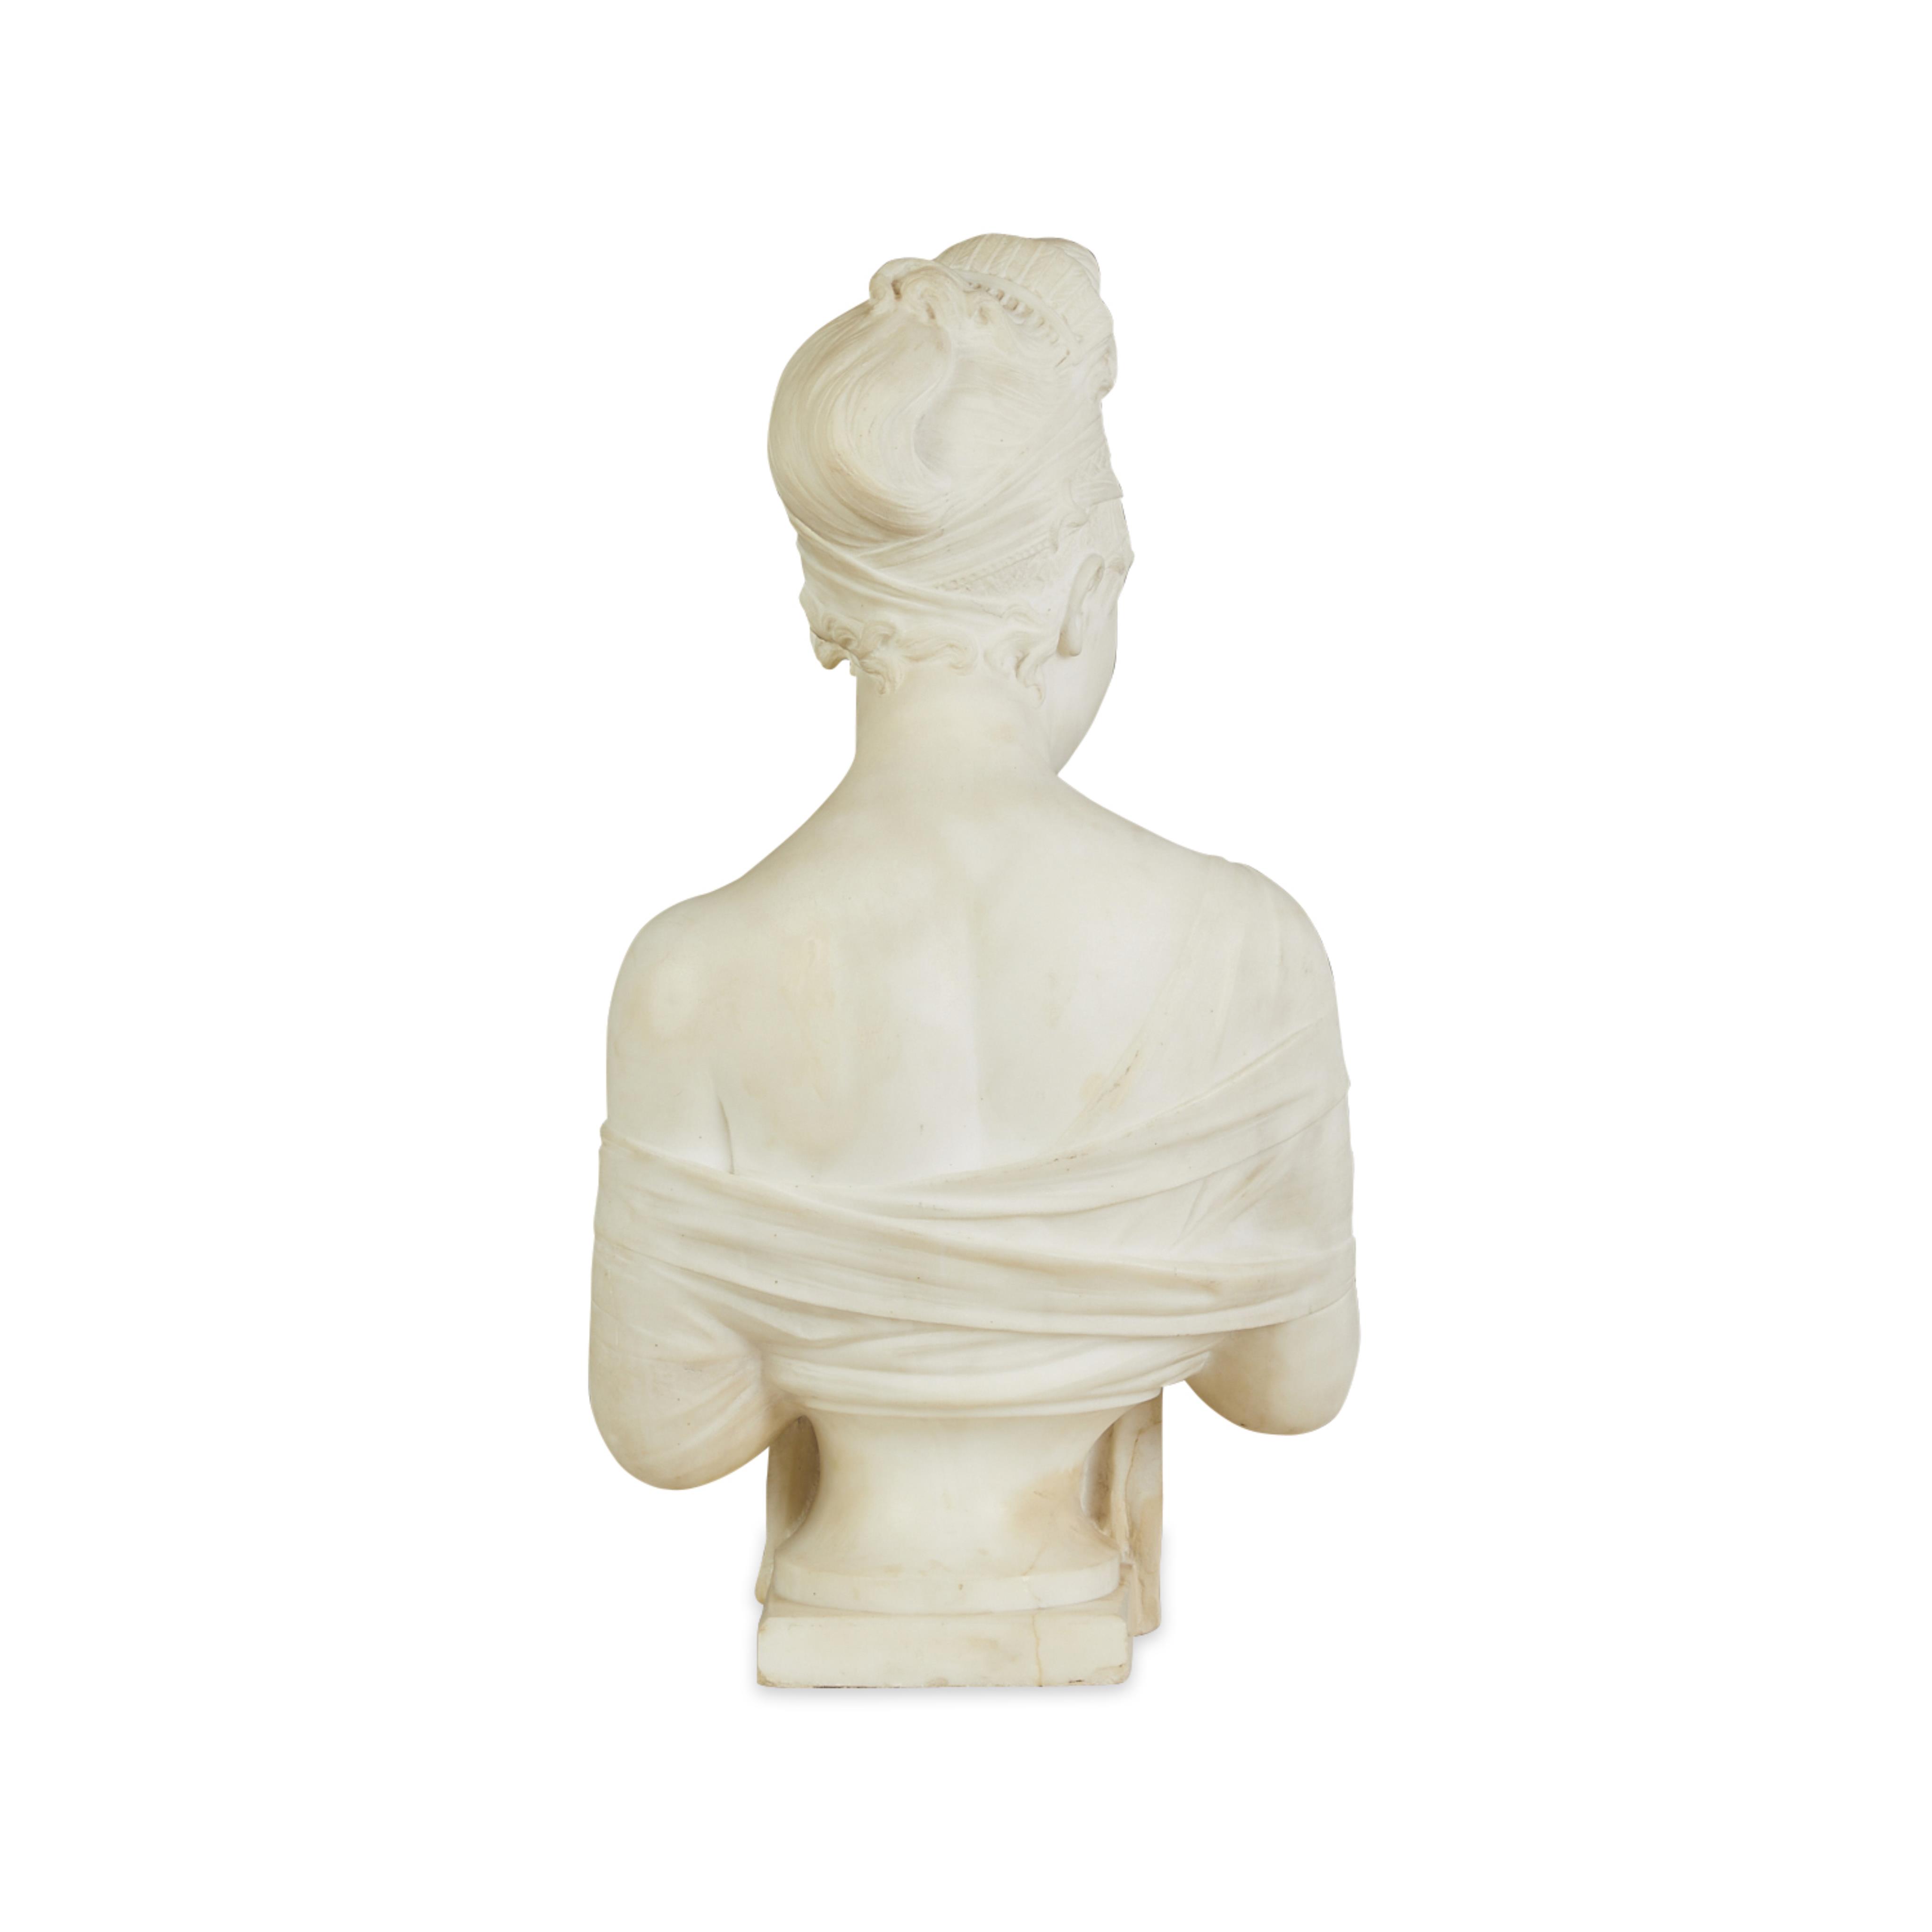 After Joseph Chinard "Madame Recamier" Marble Bust - Image 6 of 9